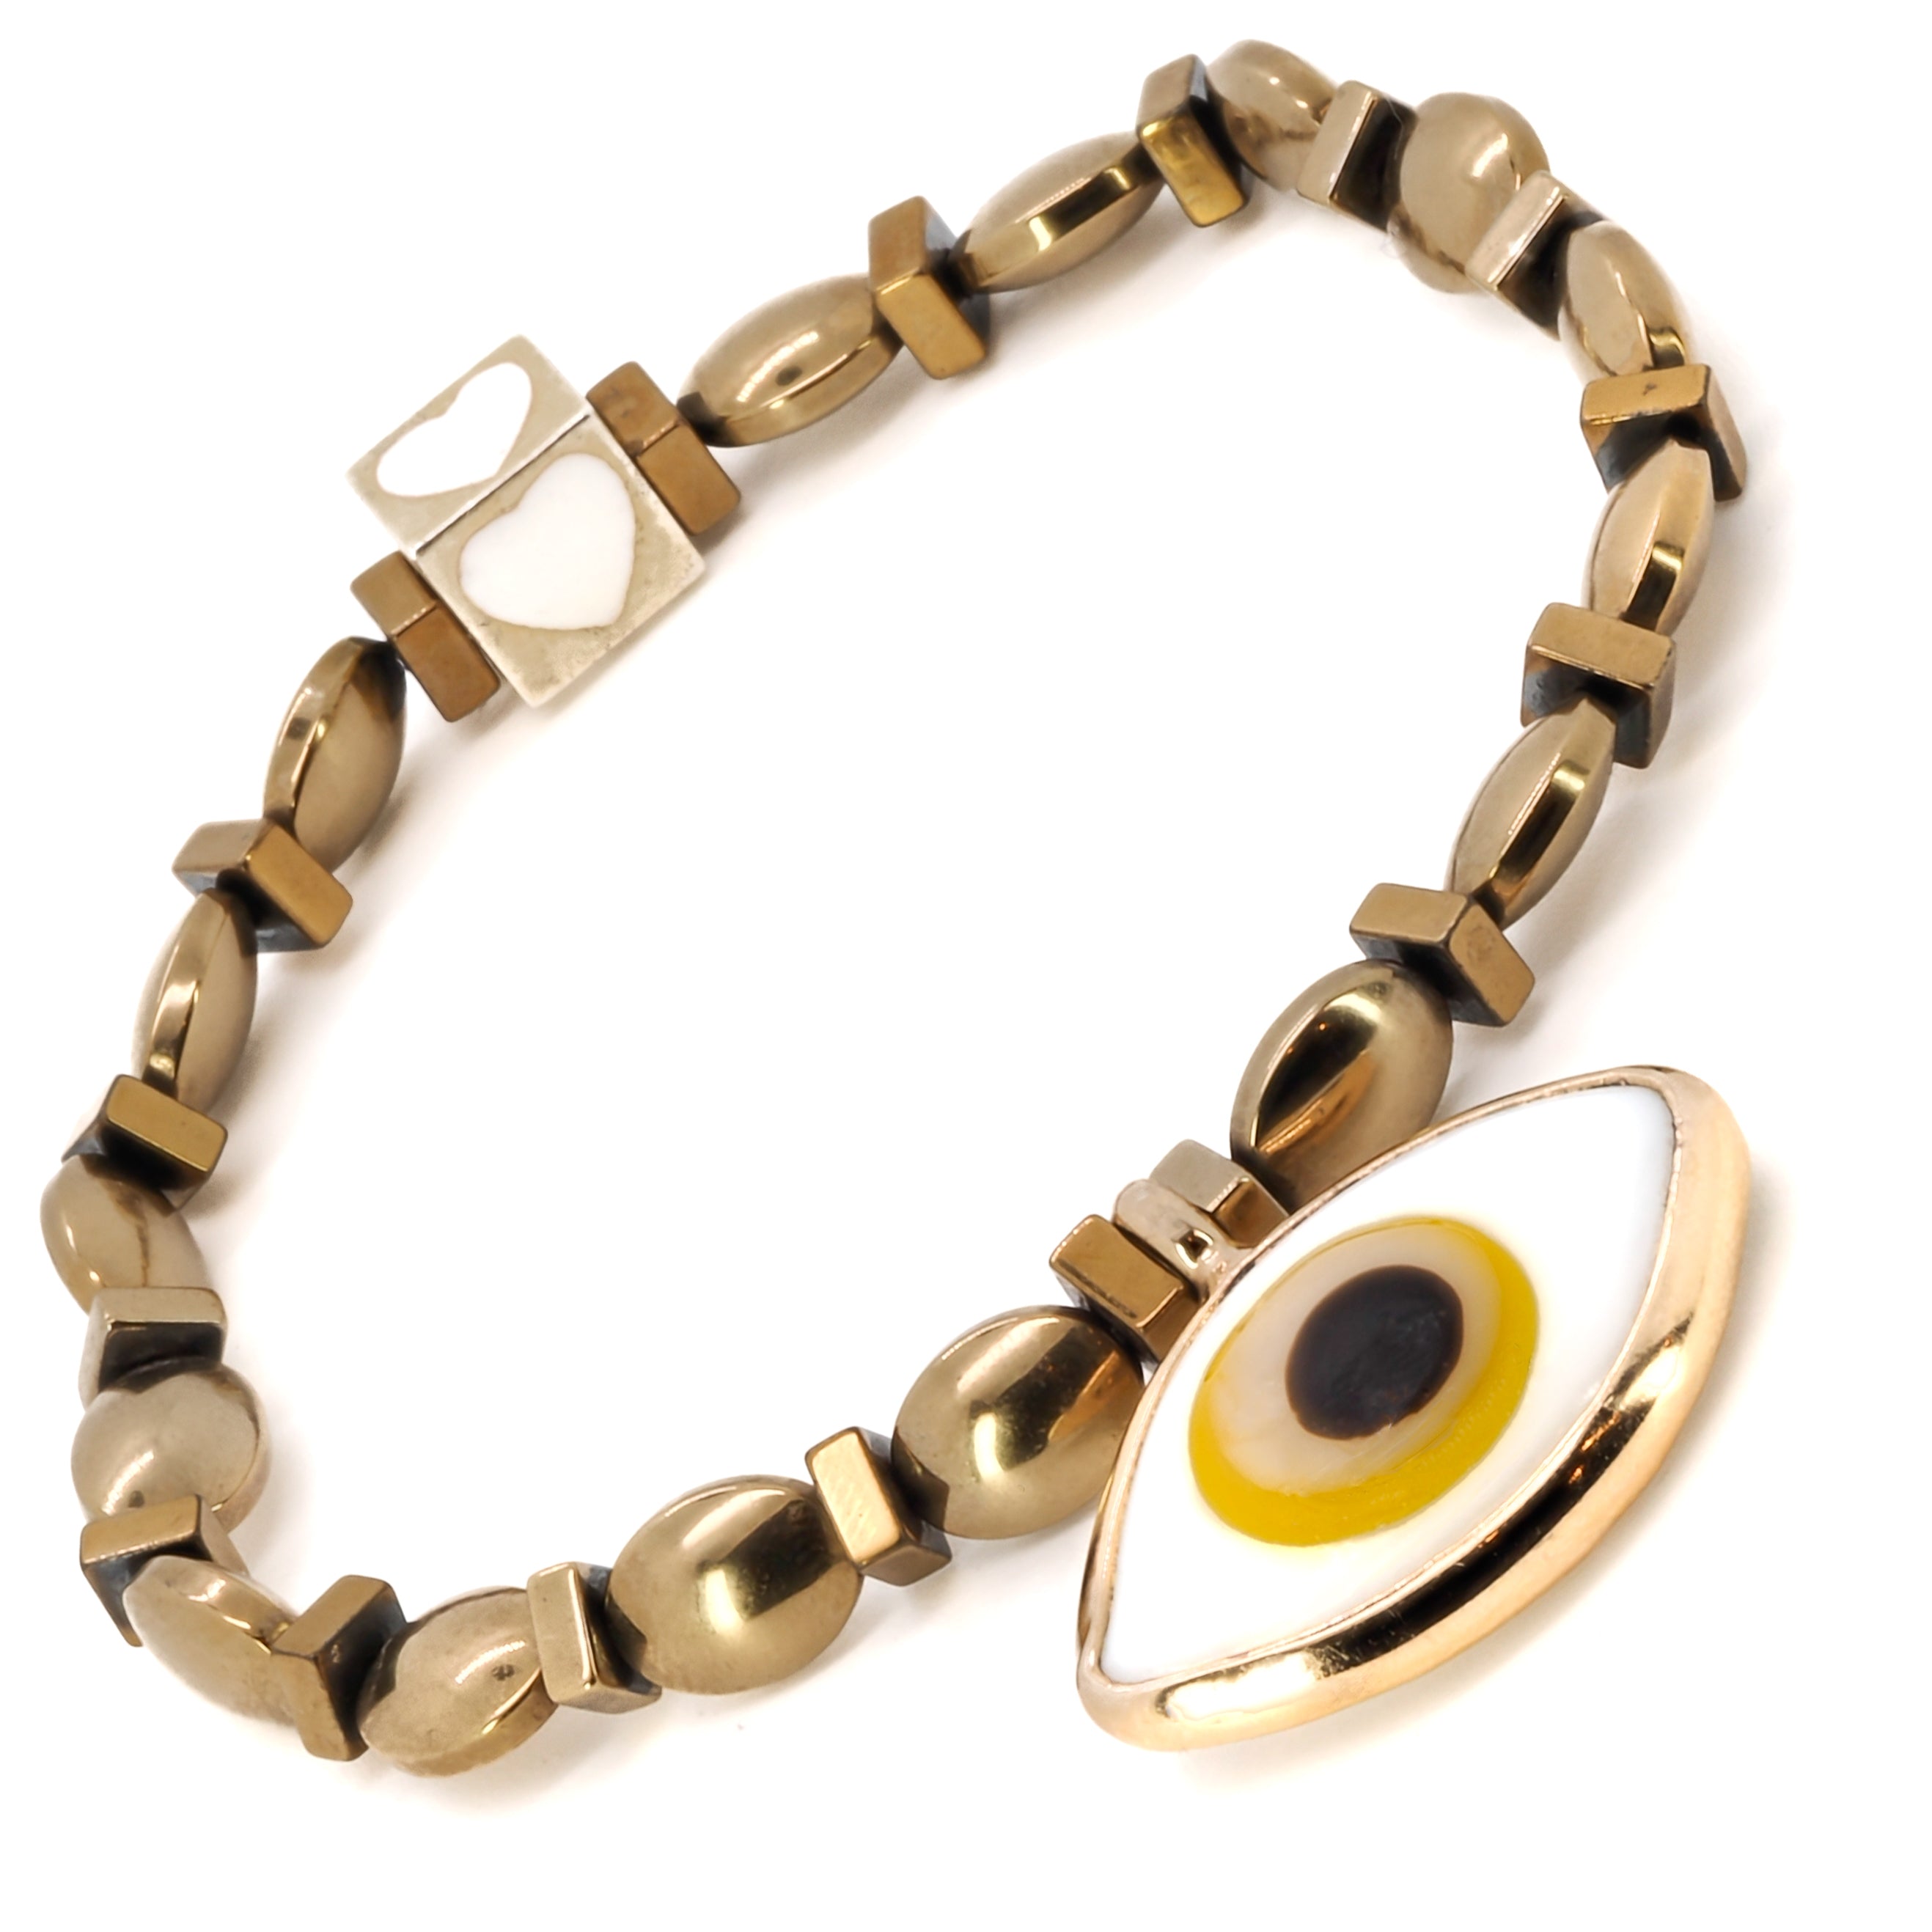 The Yellow Evil Eye Bracelet exudes style and protection, featuring gold-colored hematite beads and a captivating evil eye charm.